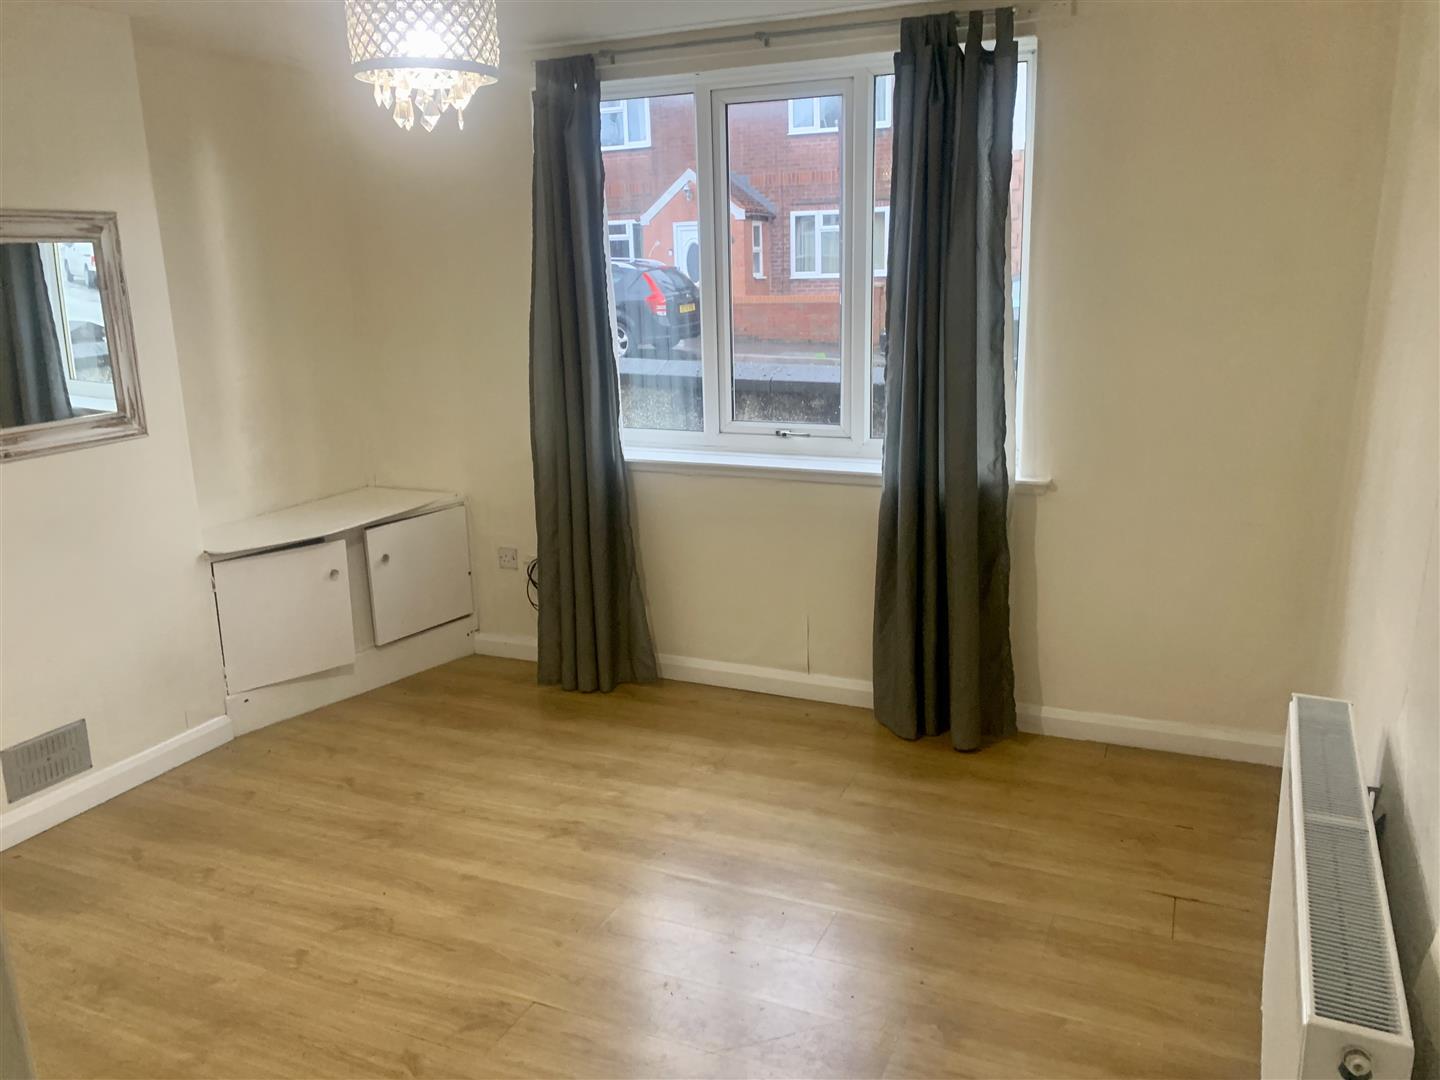 3 bed  for sale in Ilkeston  - Property Image 3